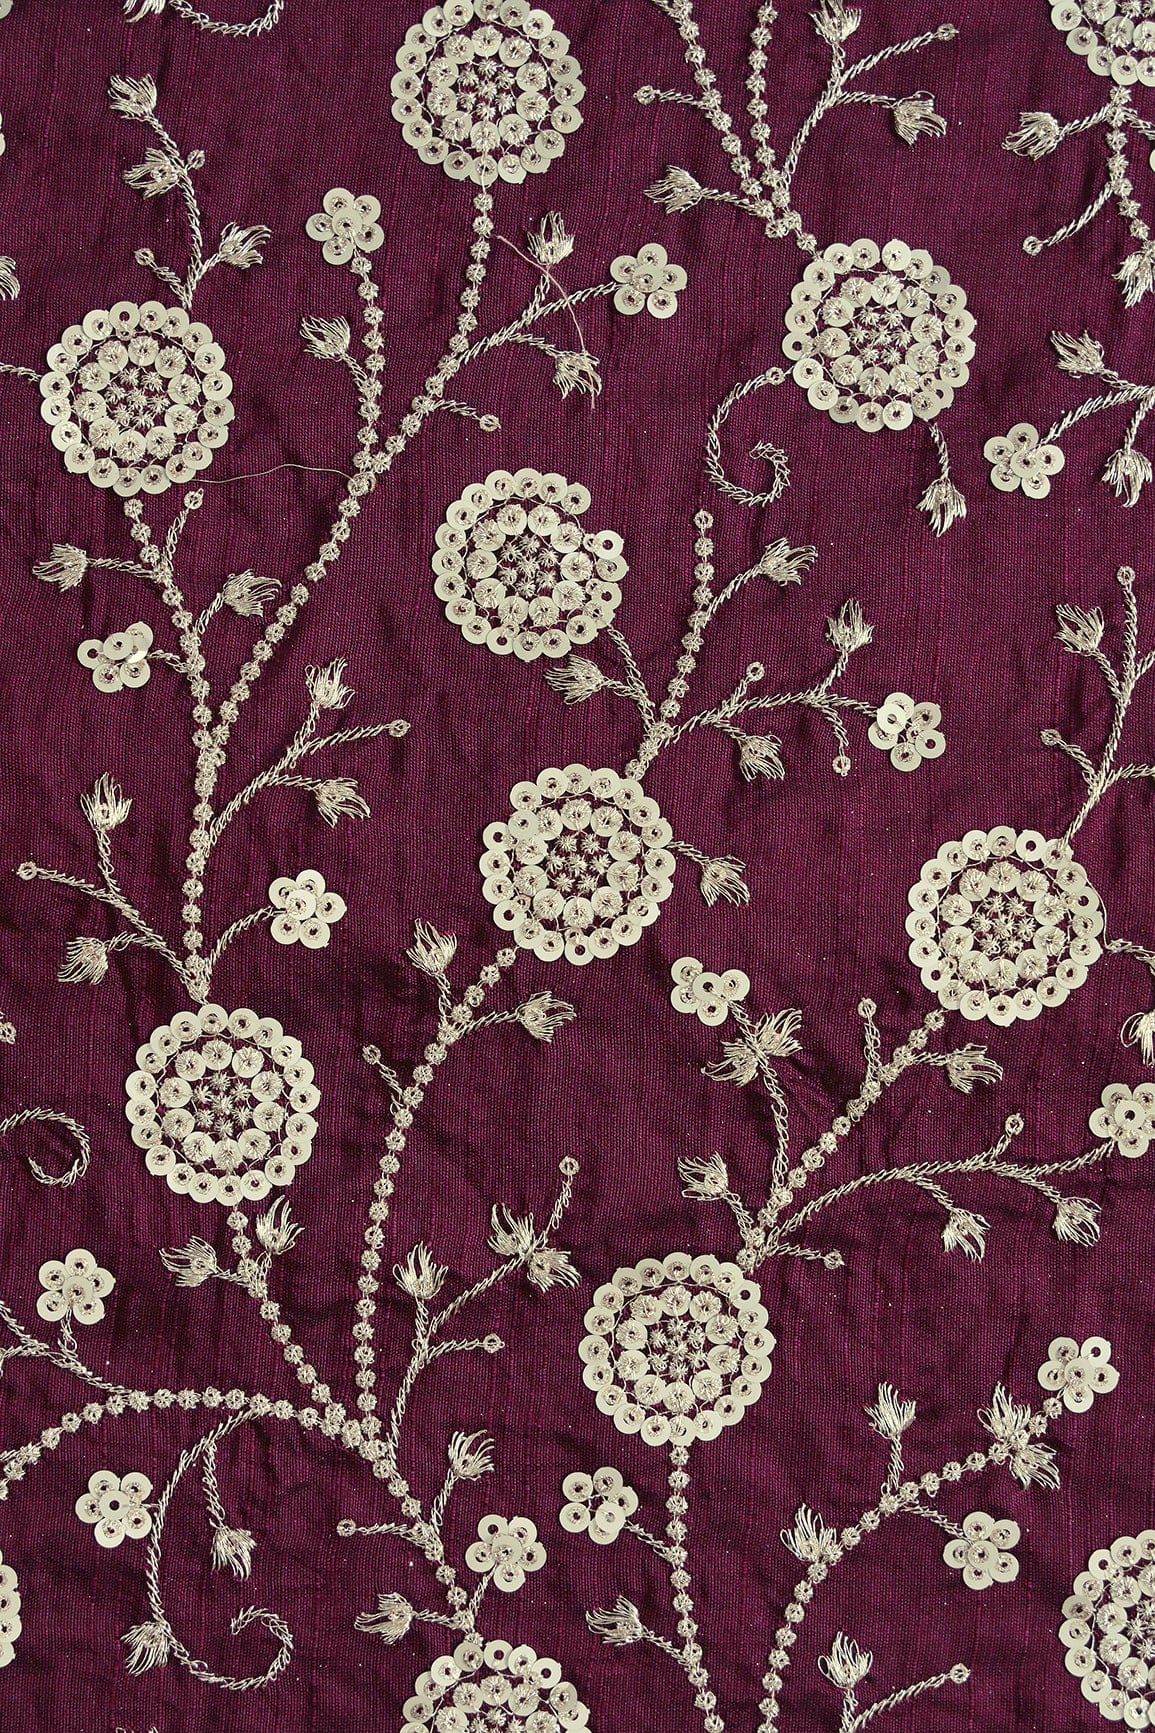 doeraa Embroidery Fabrics Gold Zari With Gold Sequins Beautiful Floral Embroidery Work On Wine Raw Silk Fabric